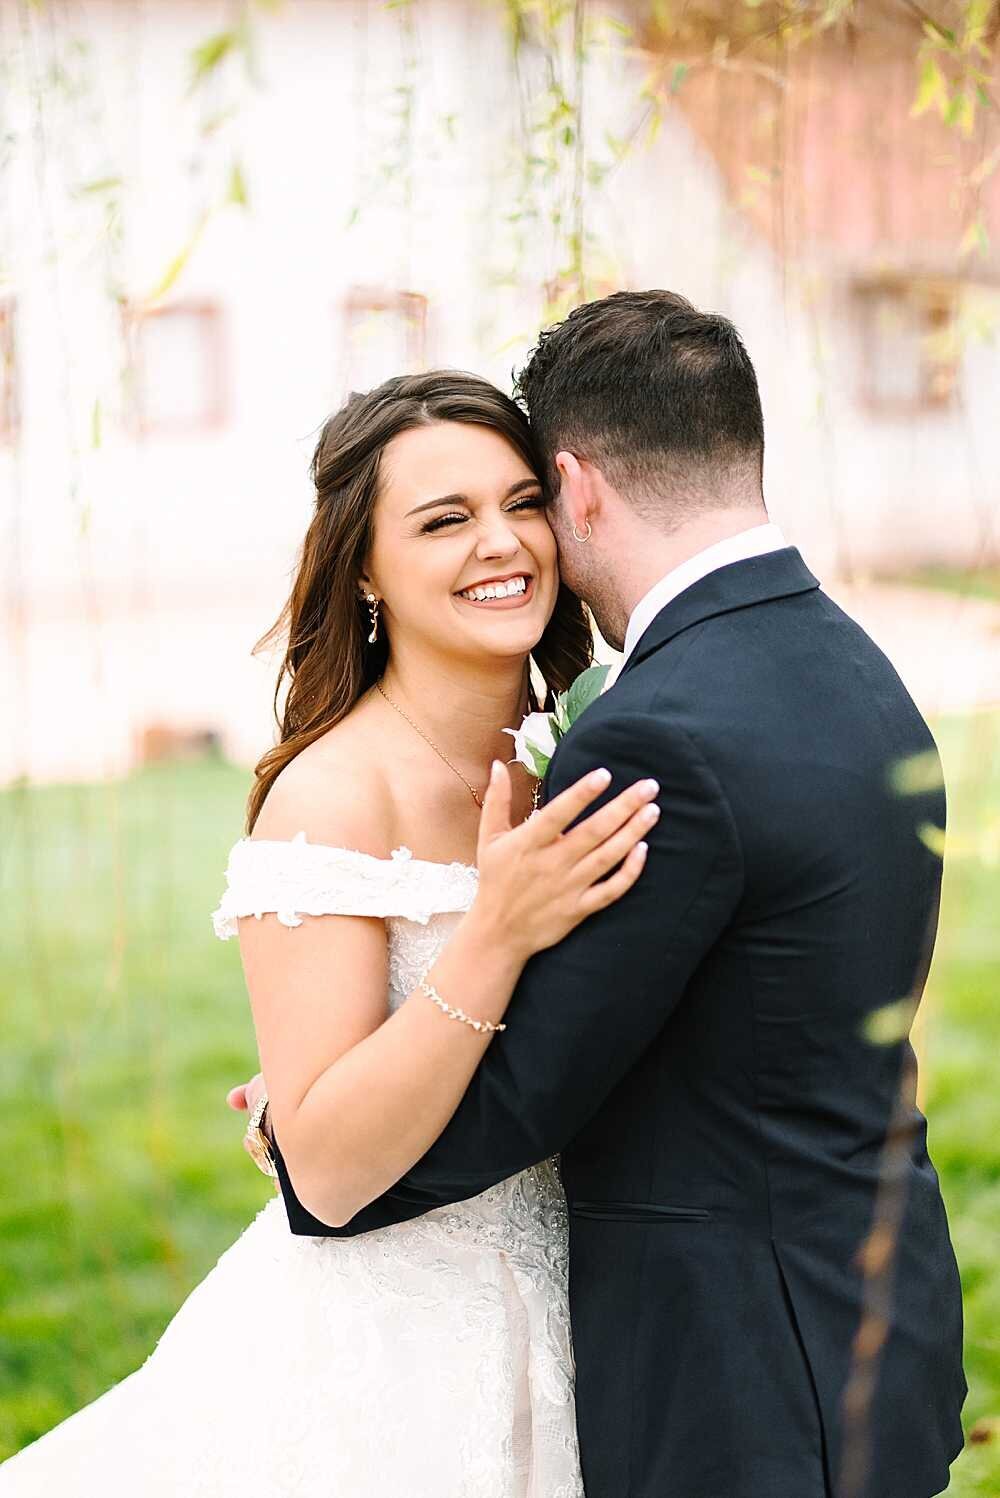 bride and groom laughing together on wedding day captured by wedding photographer-1